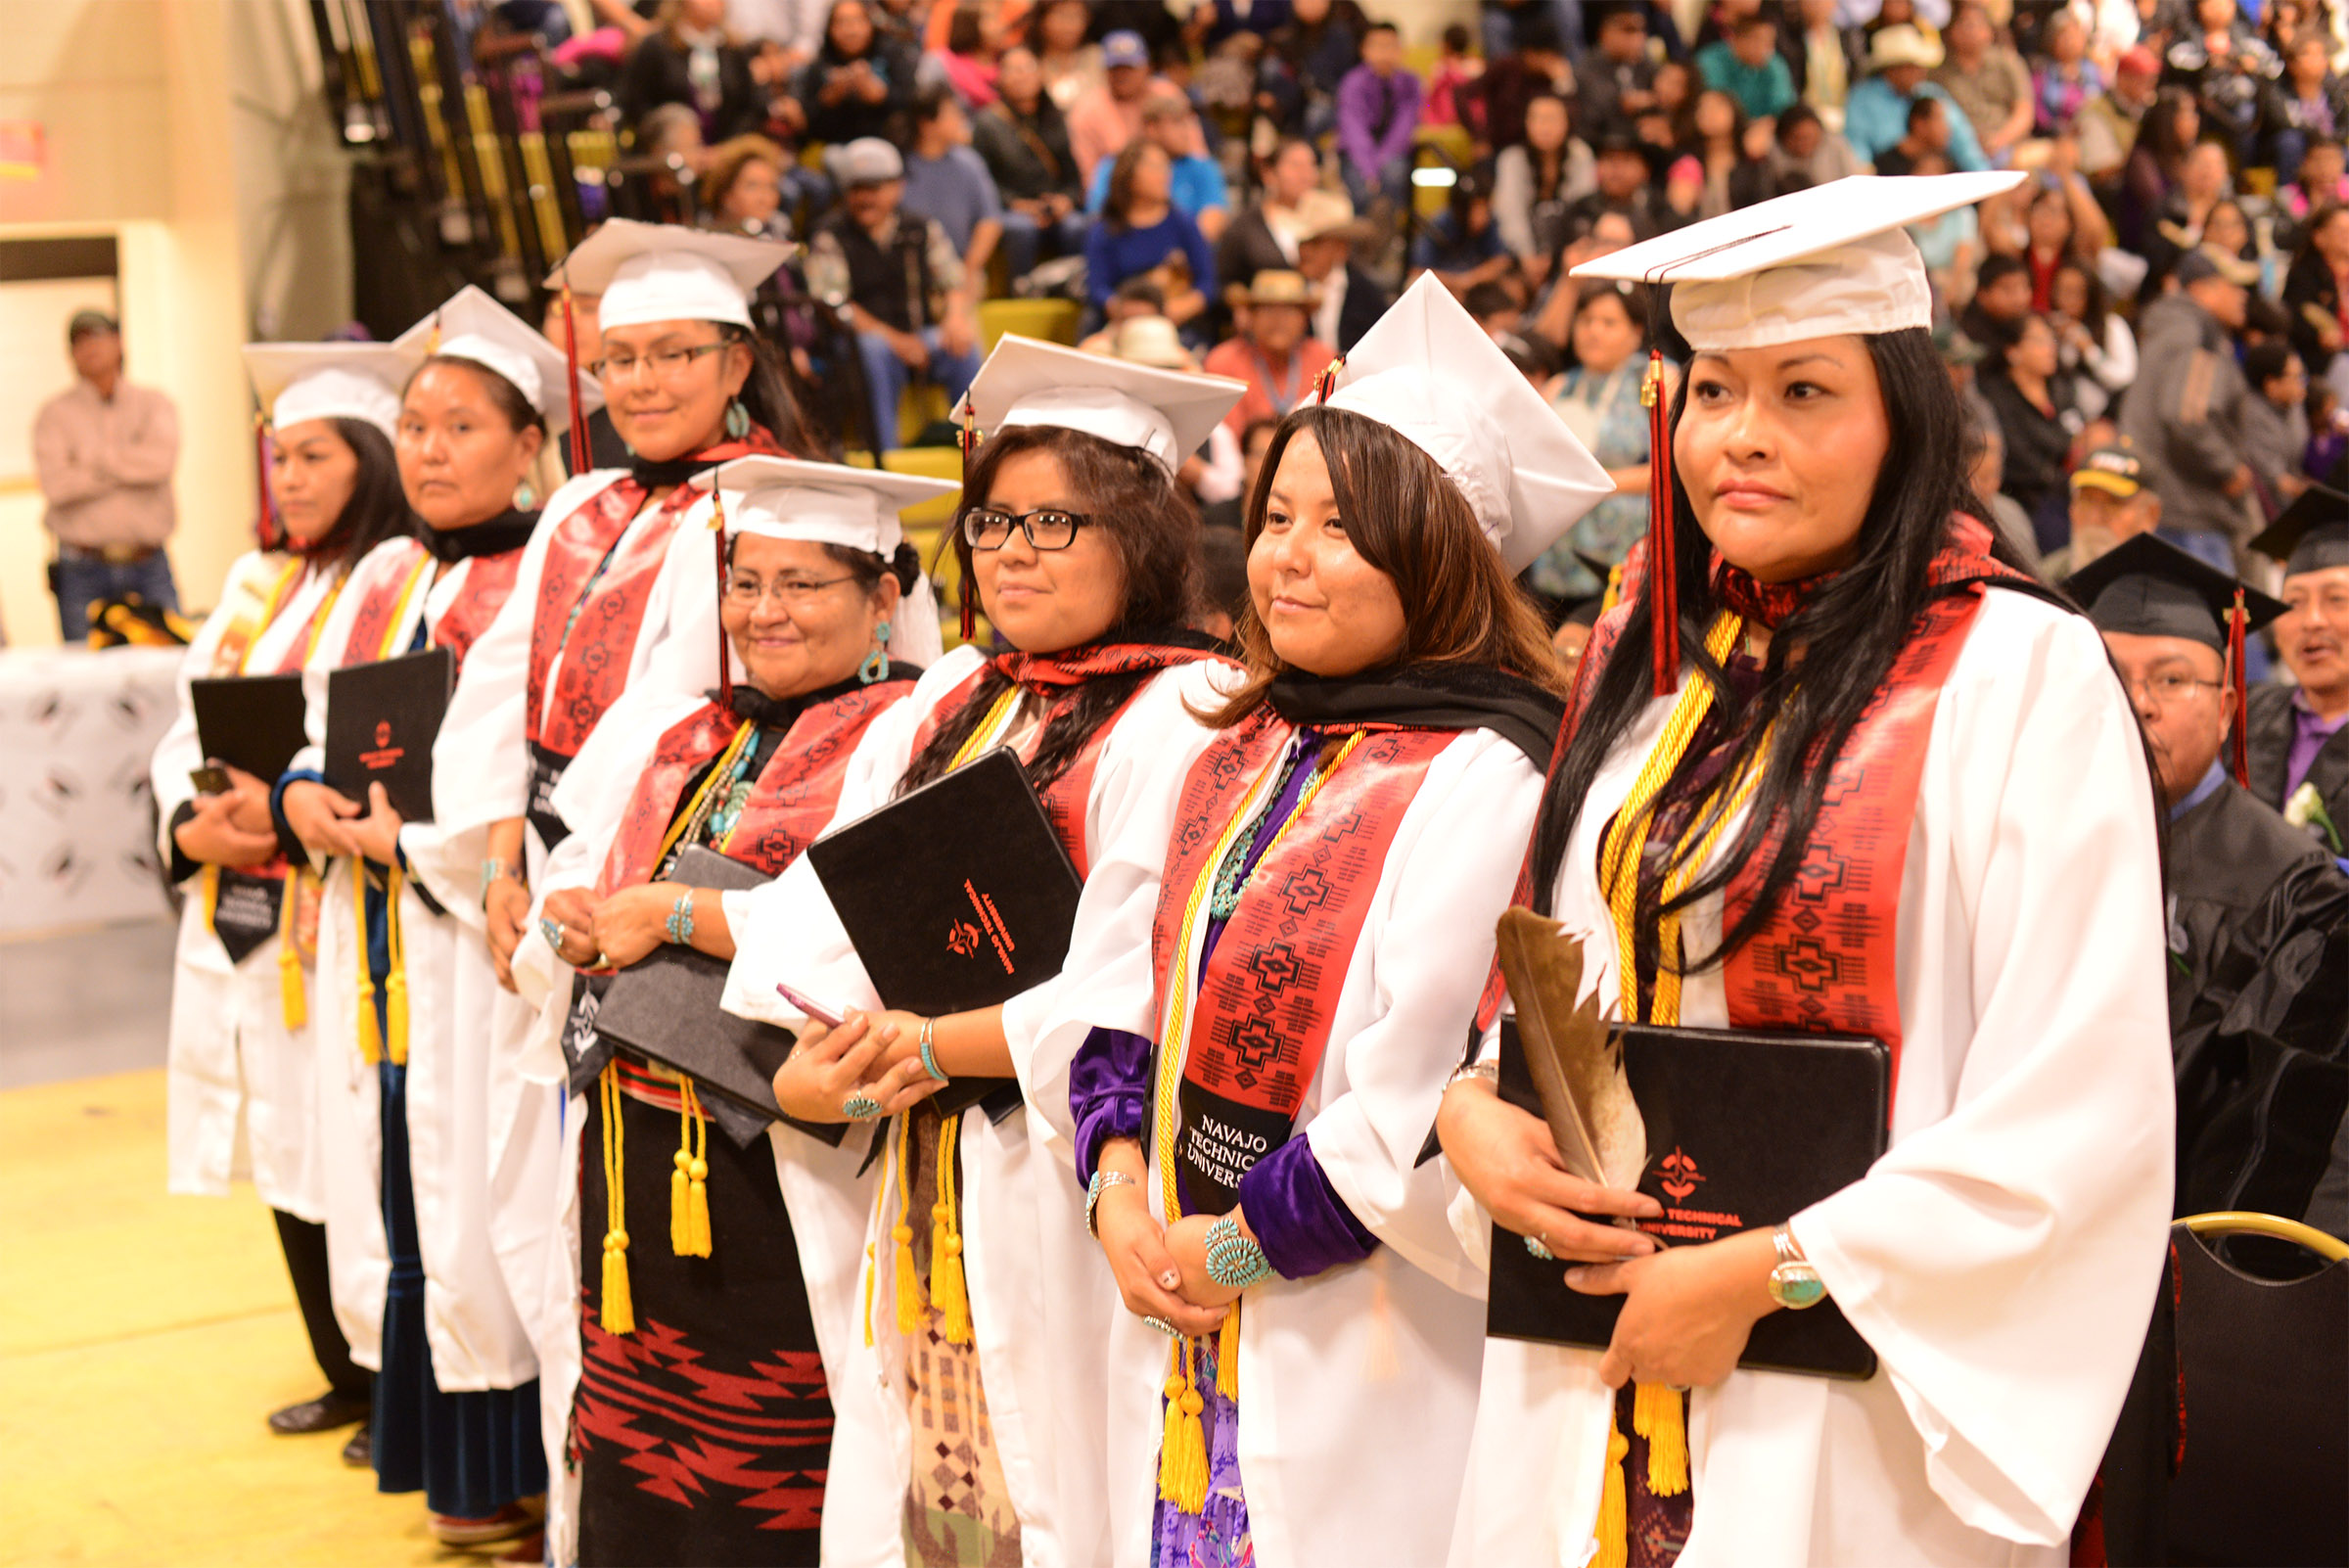 NTU granted seven baccalaureate degrees at its Fall 2015 Commencement, one in Industrial Engineering and six in Early Childhood Multicultural Education.